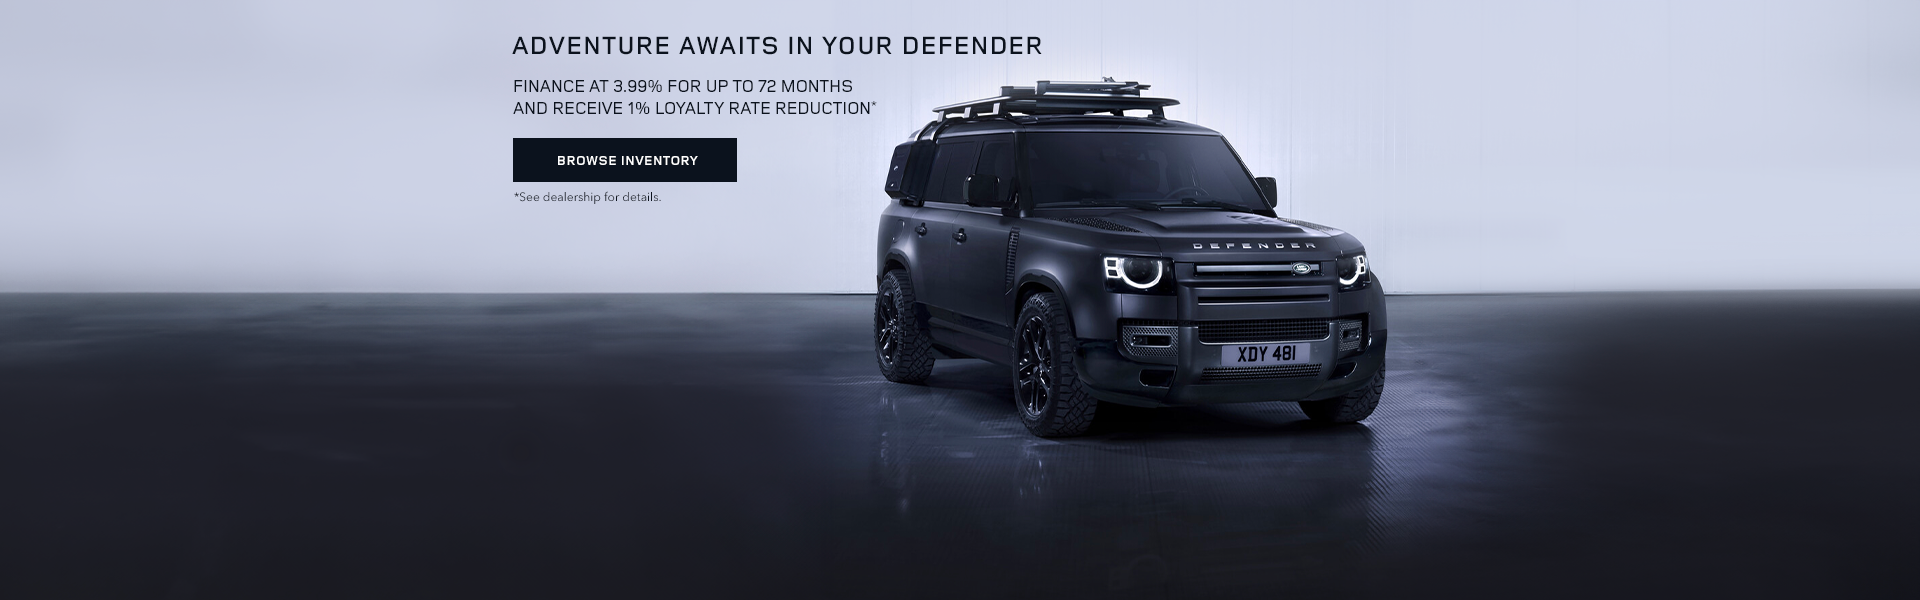 Monthly Offers - Defender